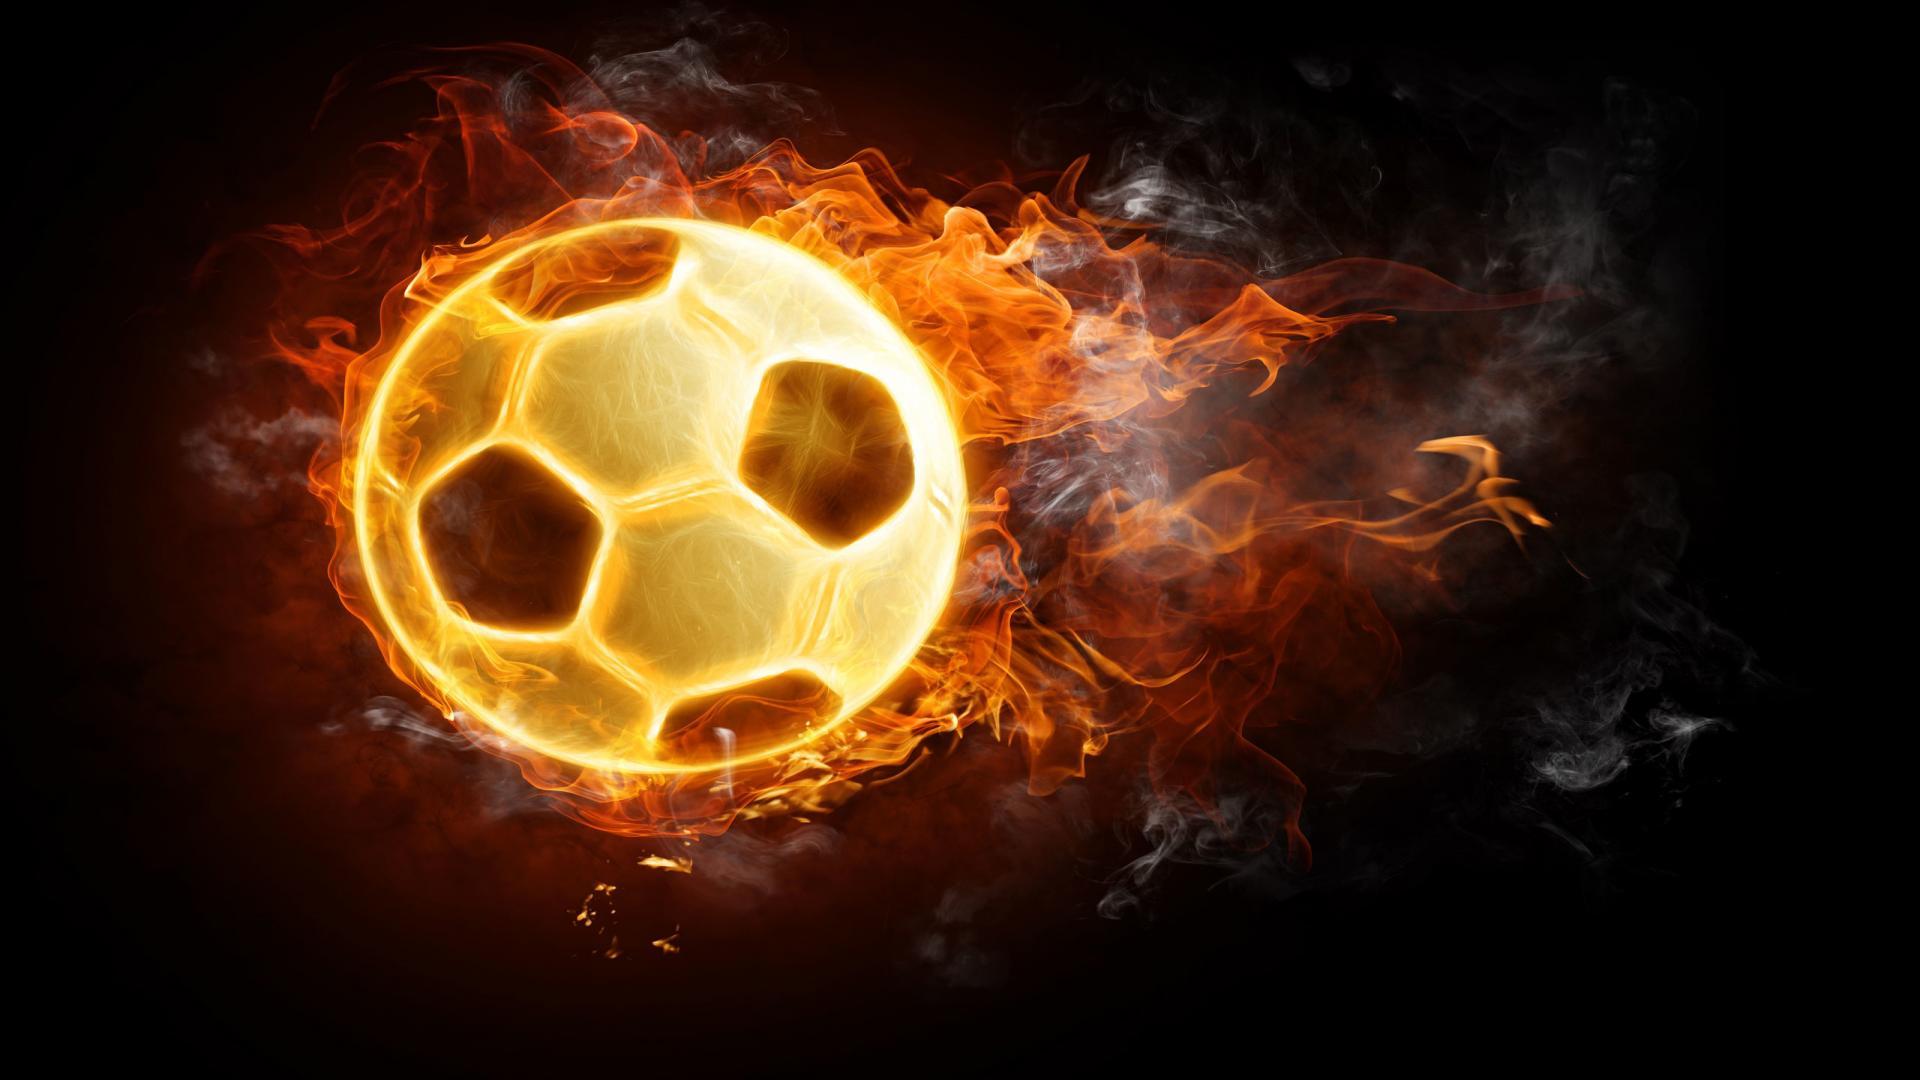 Top Beautiful Flaming Soccer Ball Image, 2560x1600 px